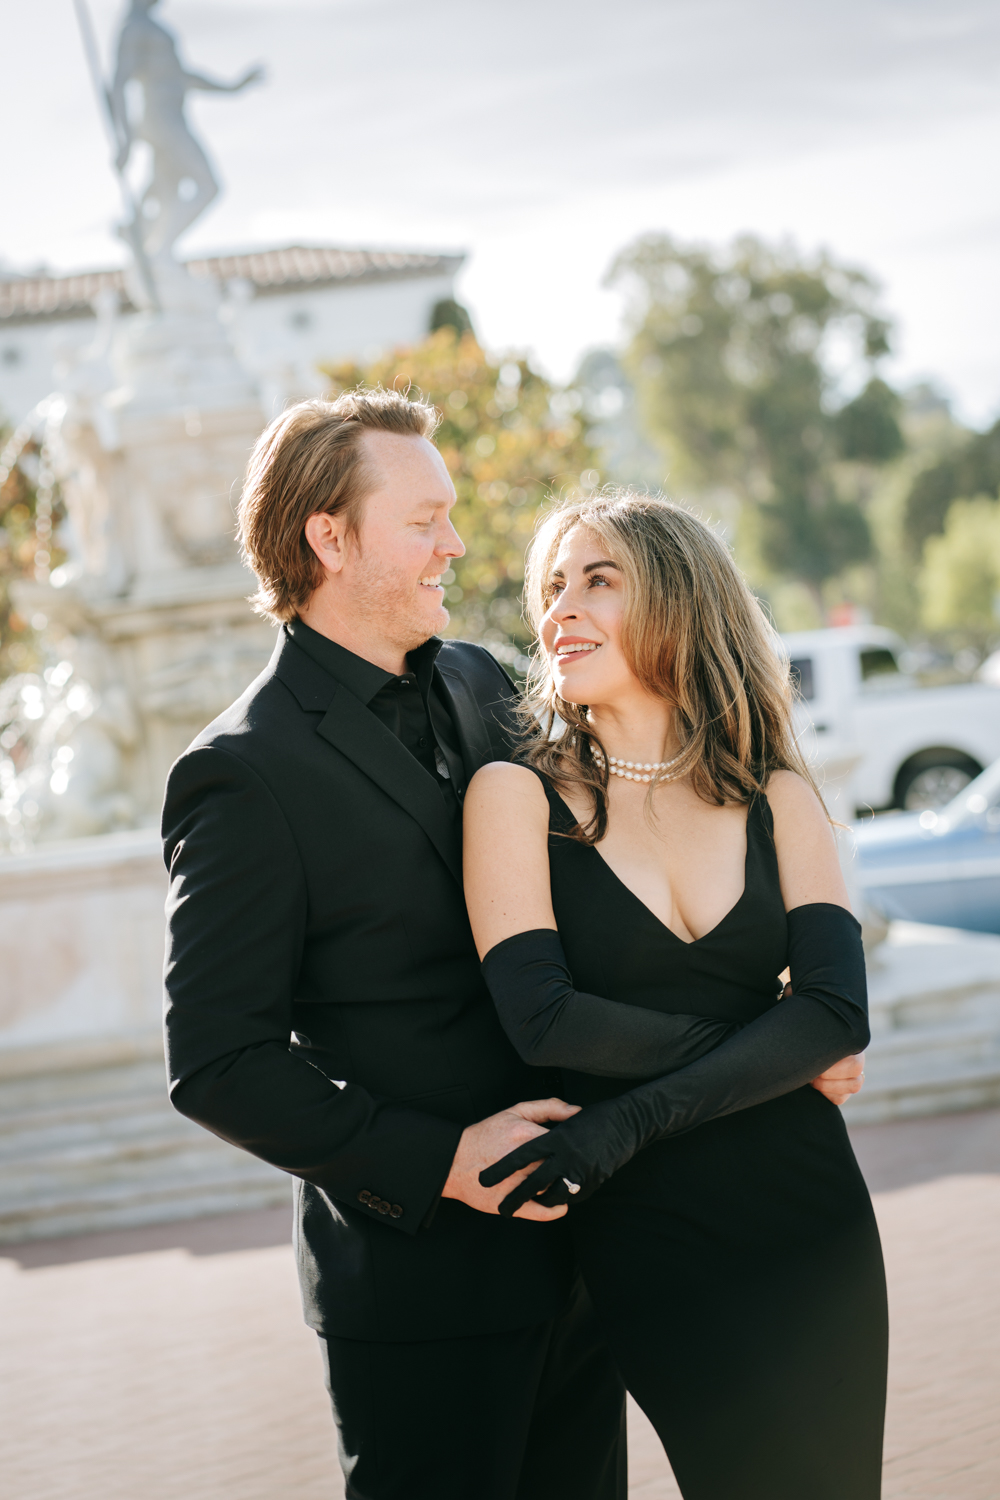 10 Years Wedding Anniversary Couples Portraits at Malaga Cove Plaza in Palos Verdes